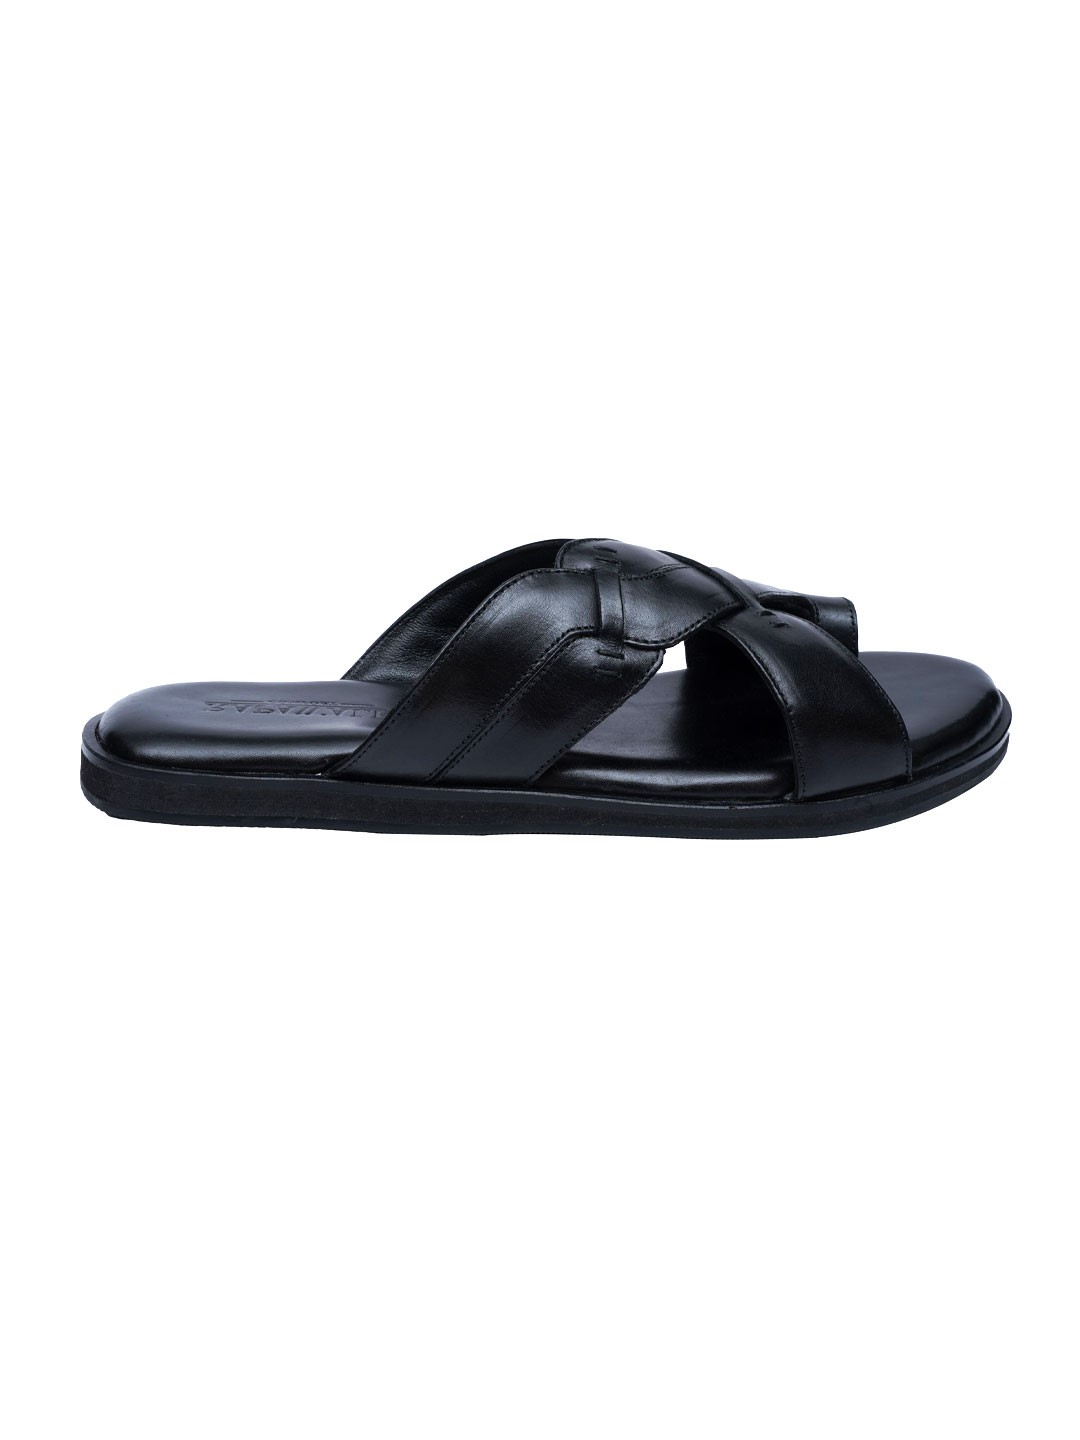 Buy Slingback Sandals, Black Leather Sandals, X Sandals, Criss Cross Sandals,  Gift for Her, Made From 100% Genuine Leather. Online in India - Etsy